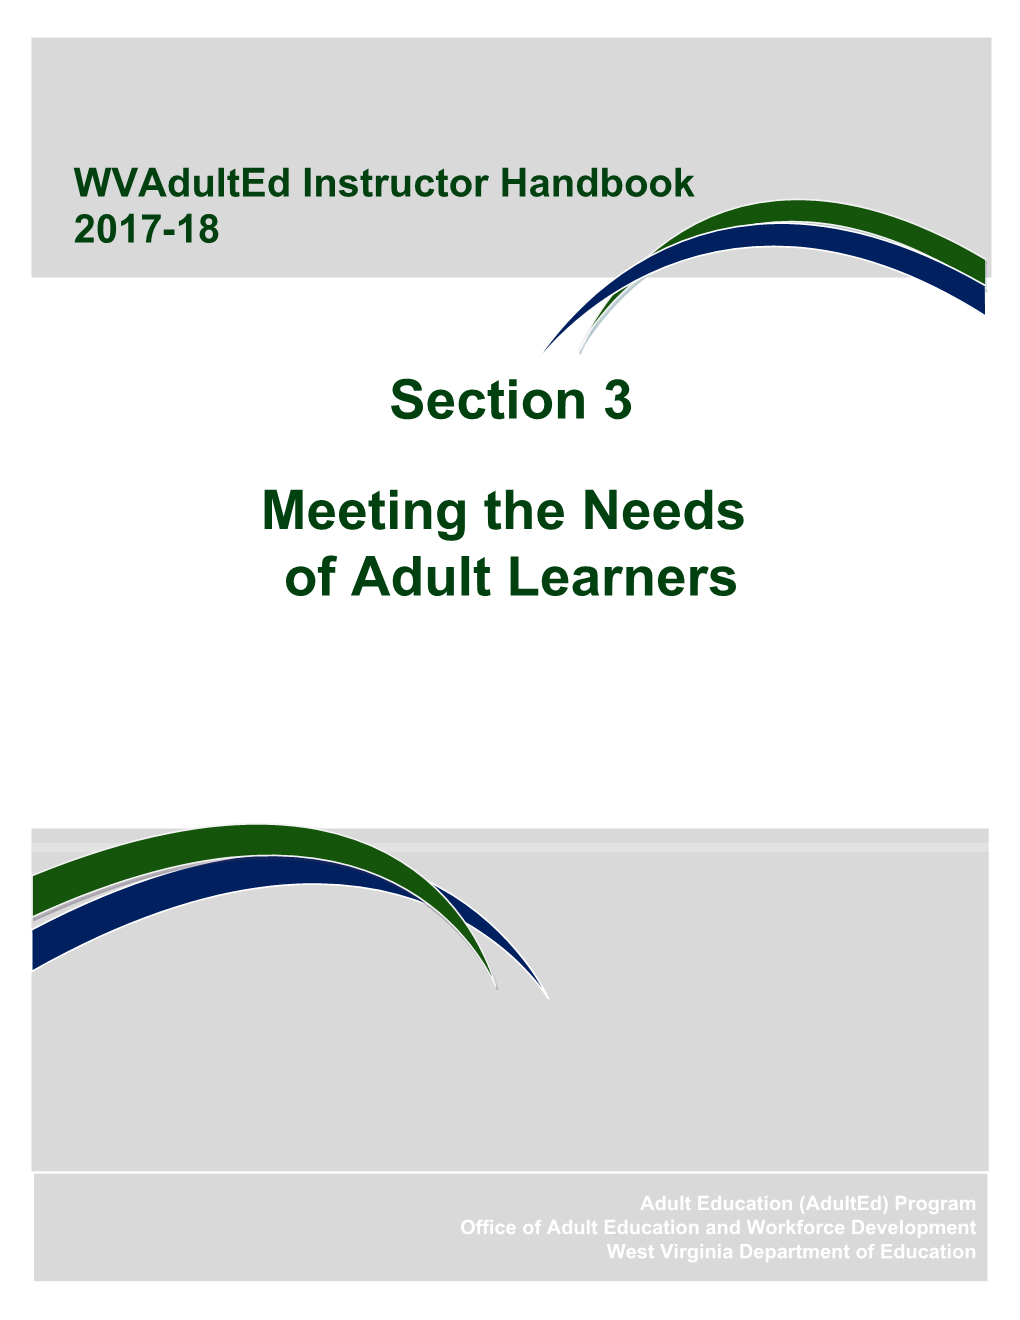 Meeting the Needs of Adult Learners